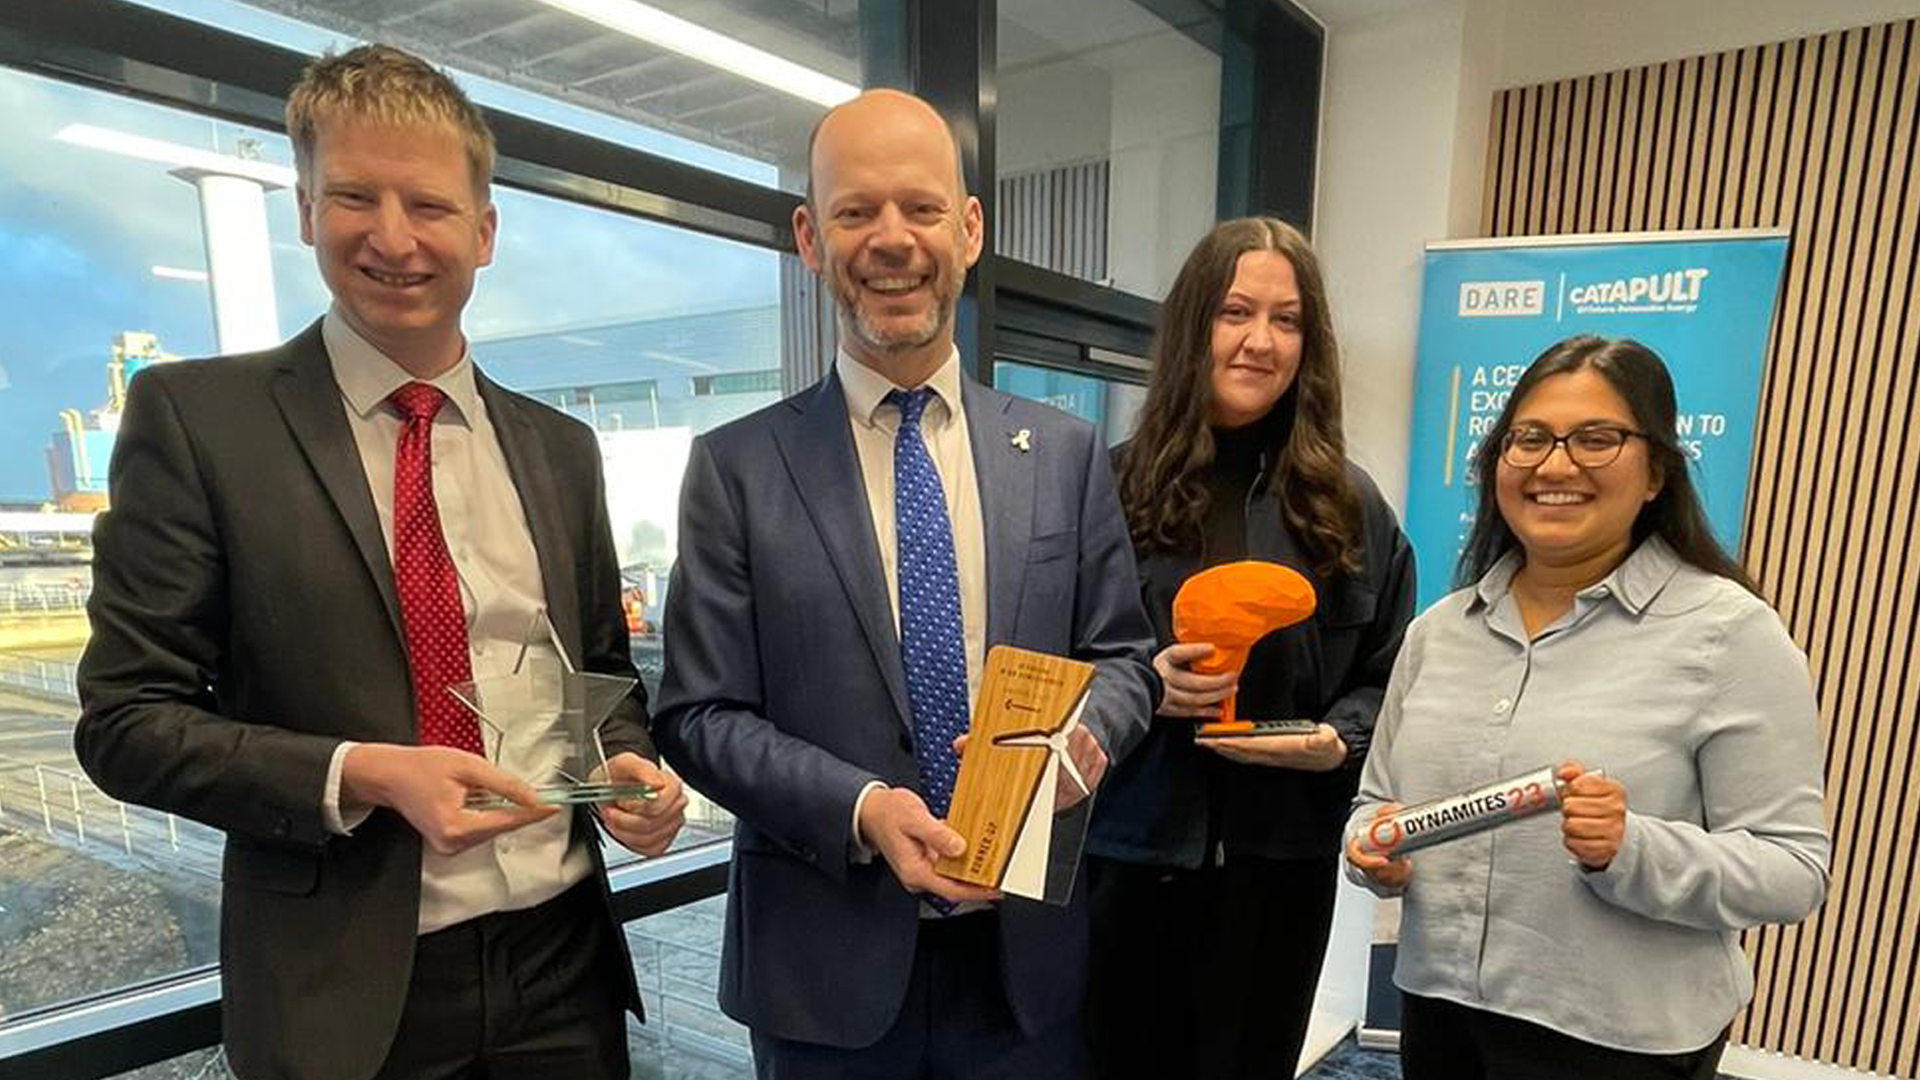 Dr Andrew Jenkins, founder of Kinewell Energy, Jamir Driscoll, elected metro mayor for the North of Tyne, Claire Hislop, research and development engineer and Henna Bains, senior engineer, showcase industry awards won by Kinewell over the past 12 months.